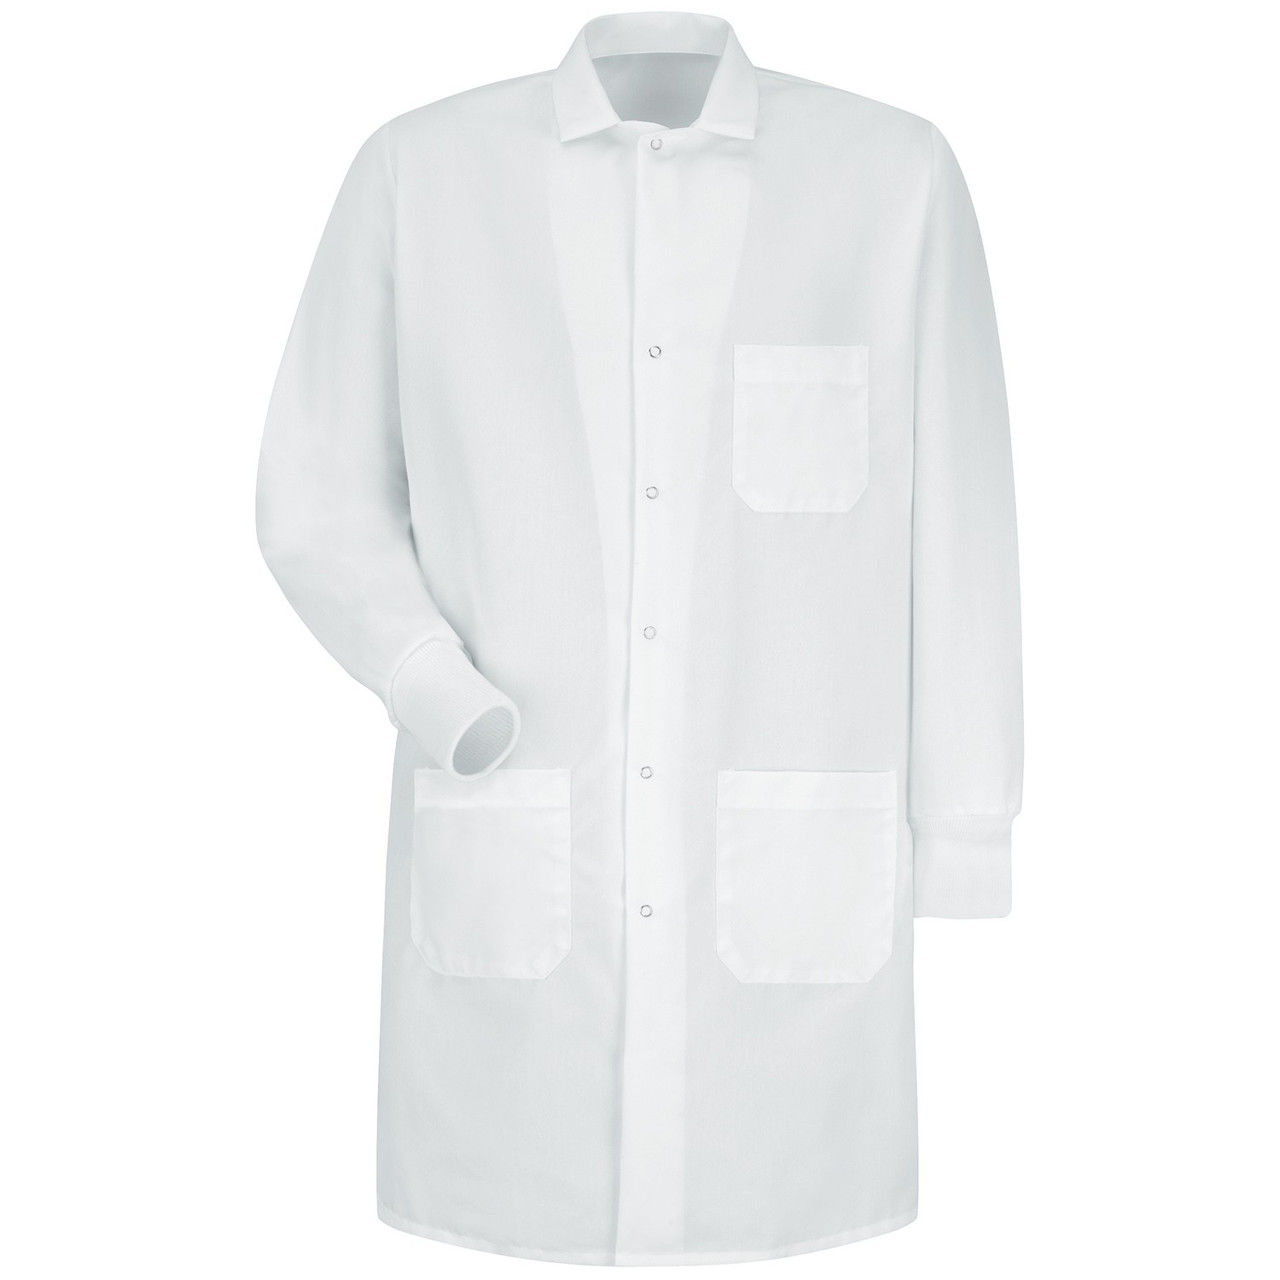 Does the lab coat cuffed sleeve come in different colors?